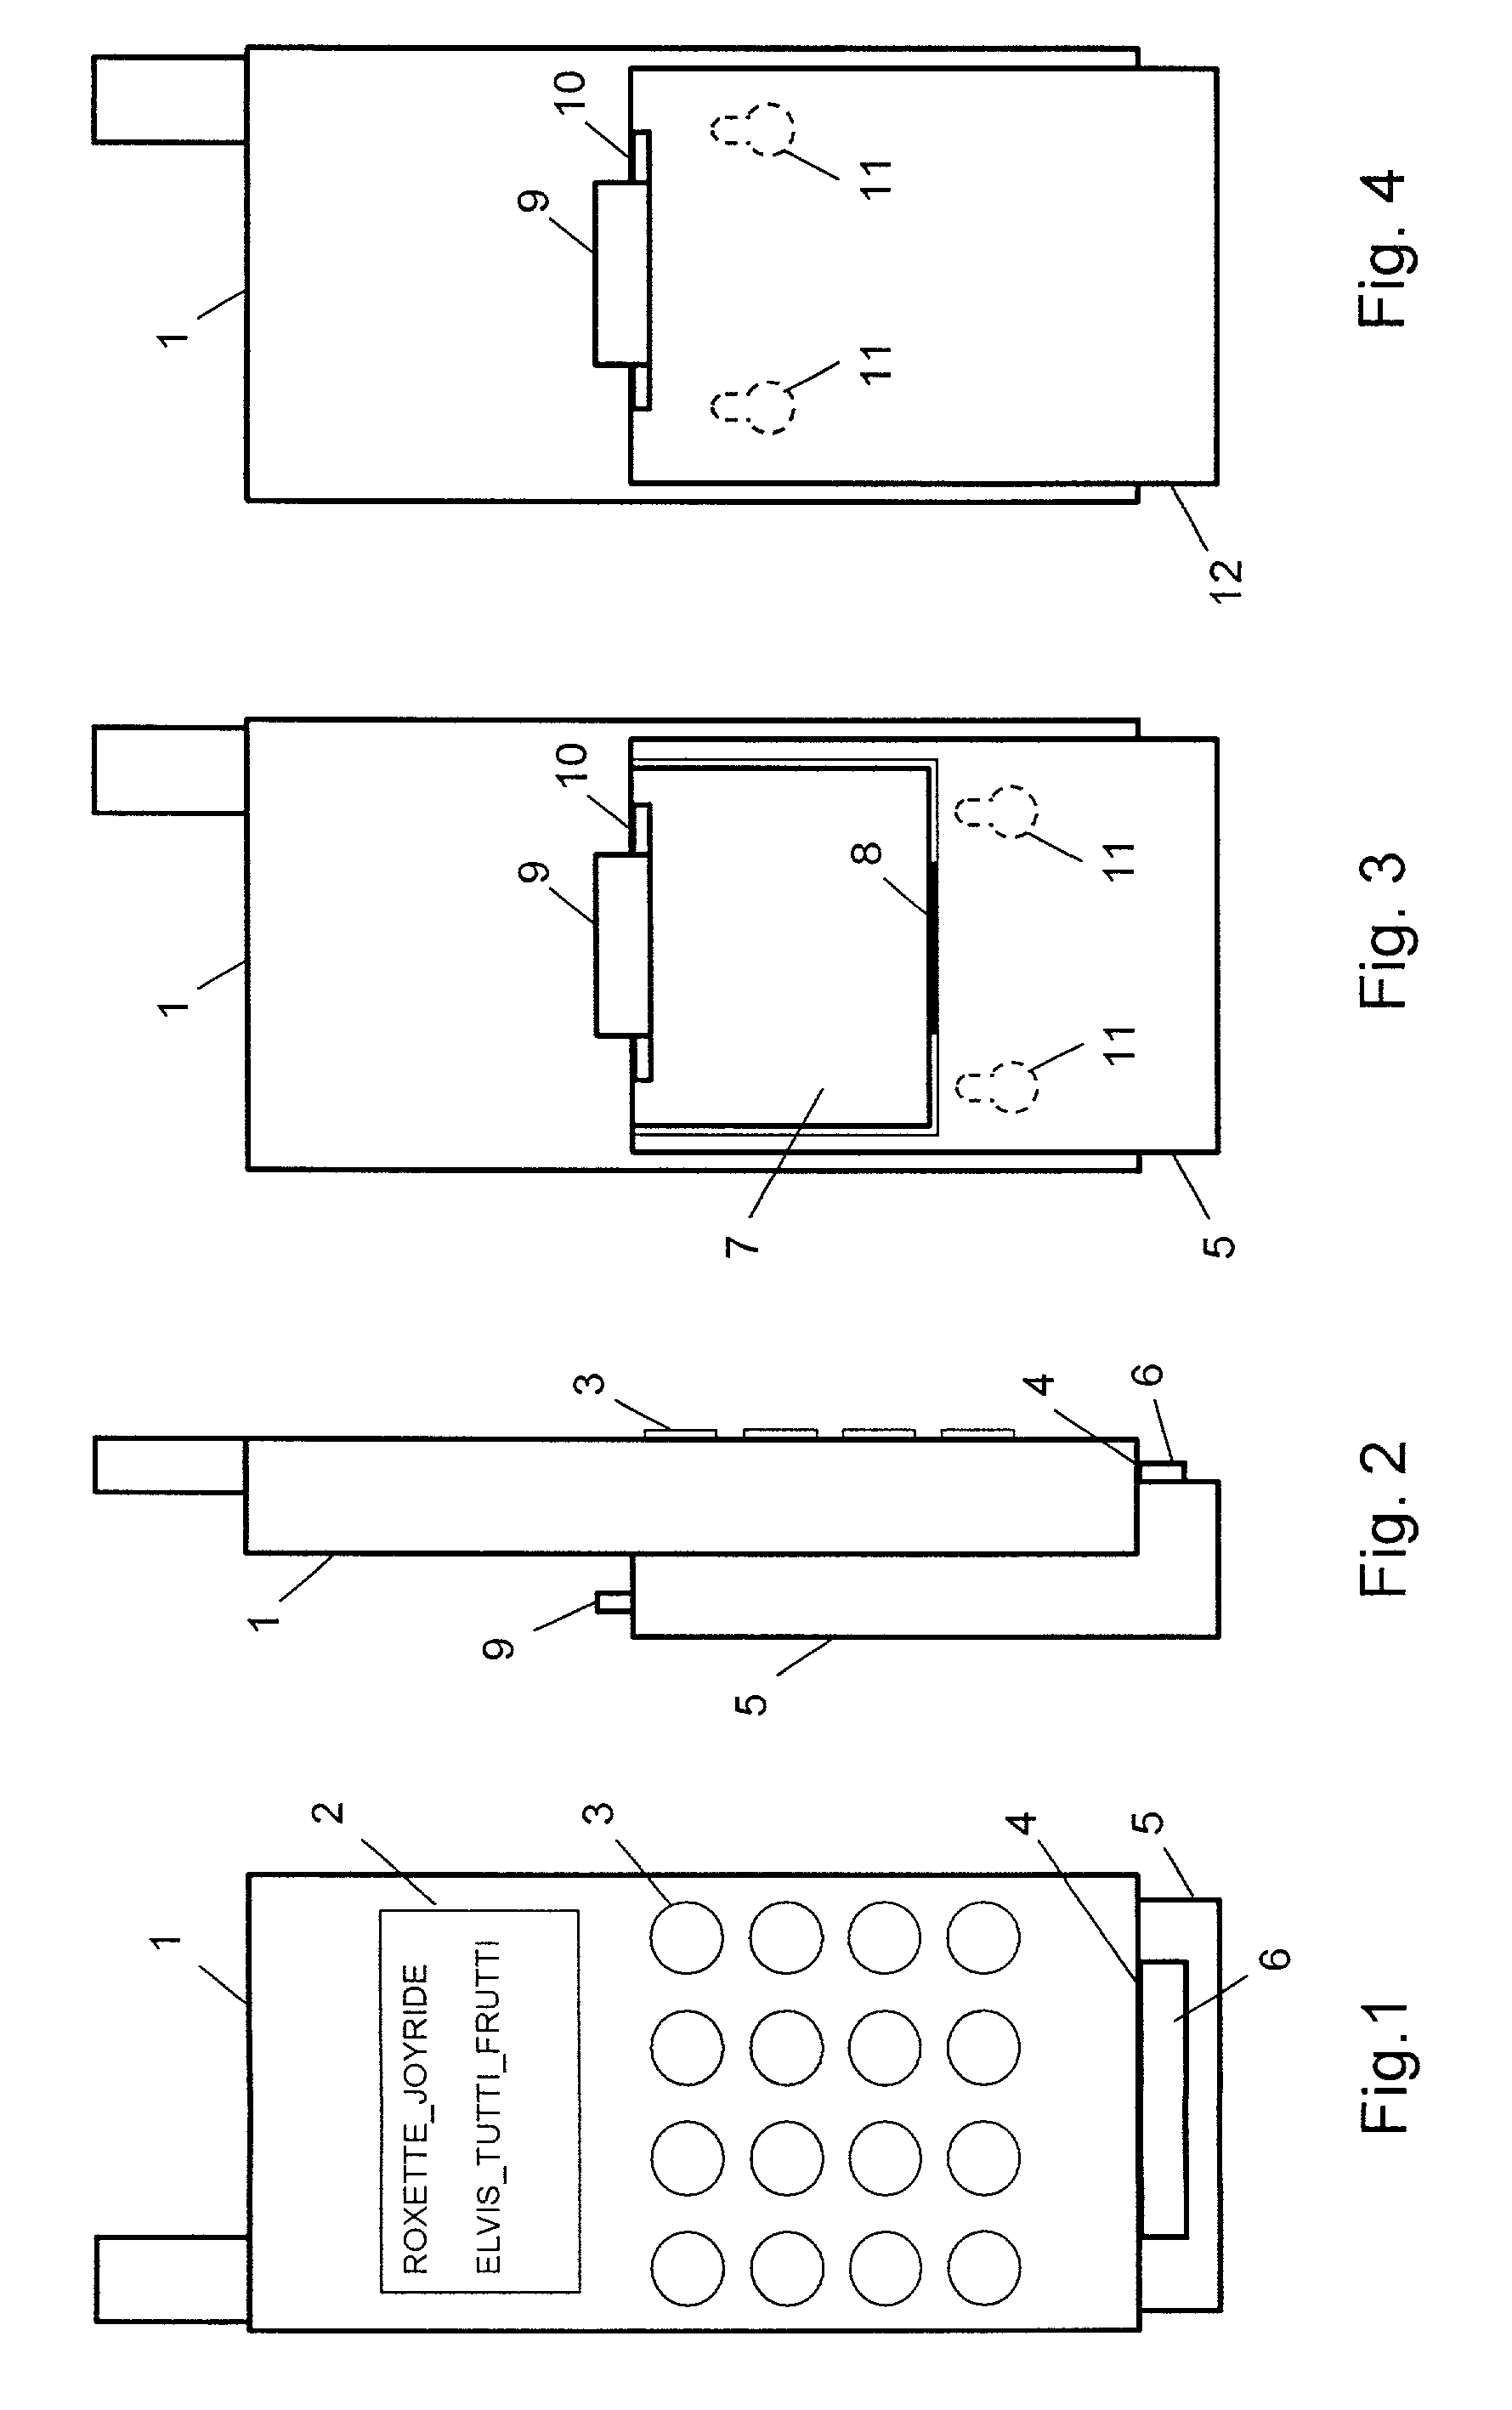 Accessory device for a portable communications device